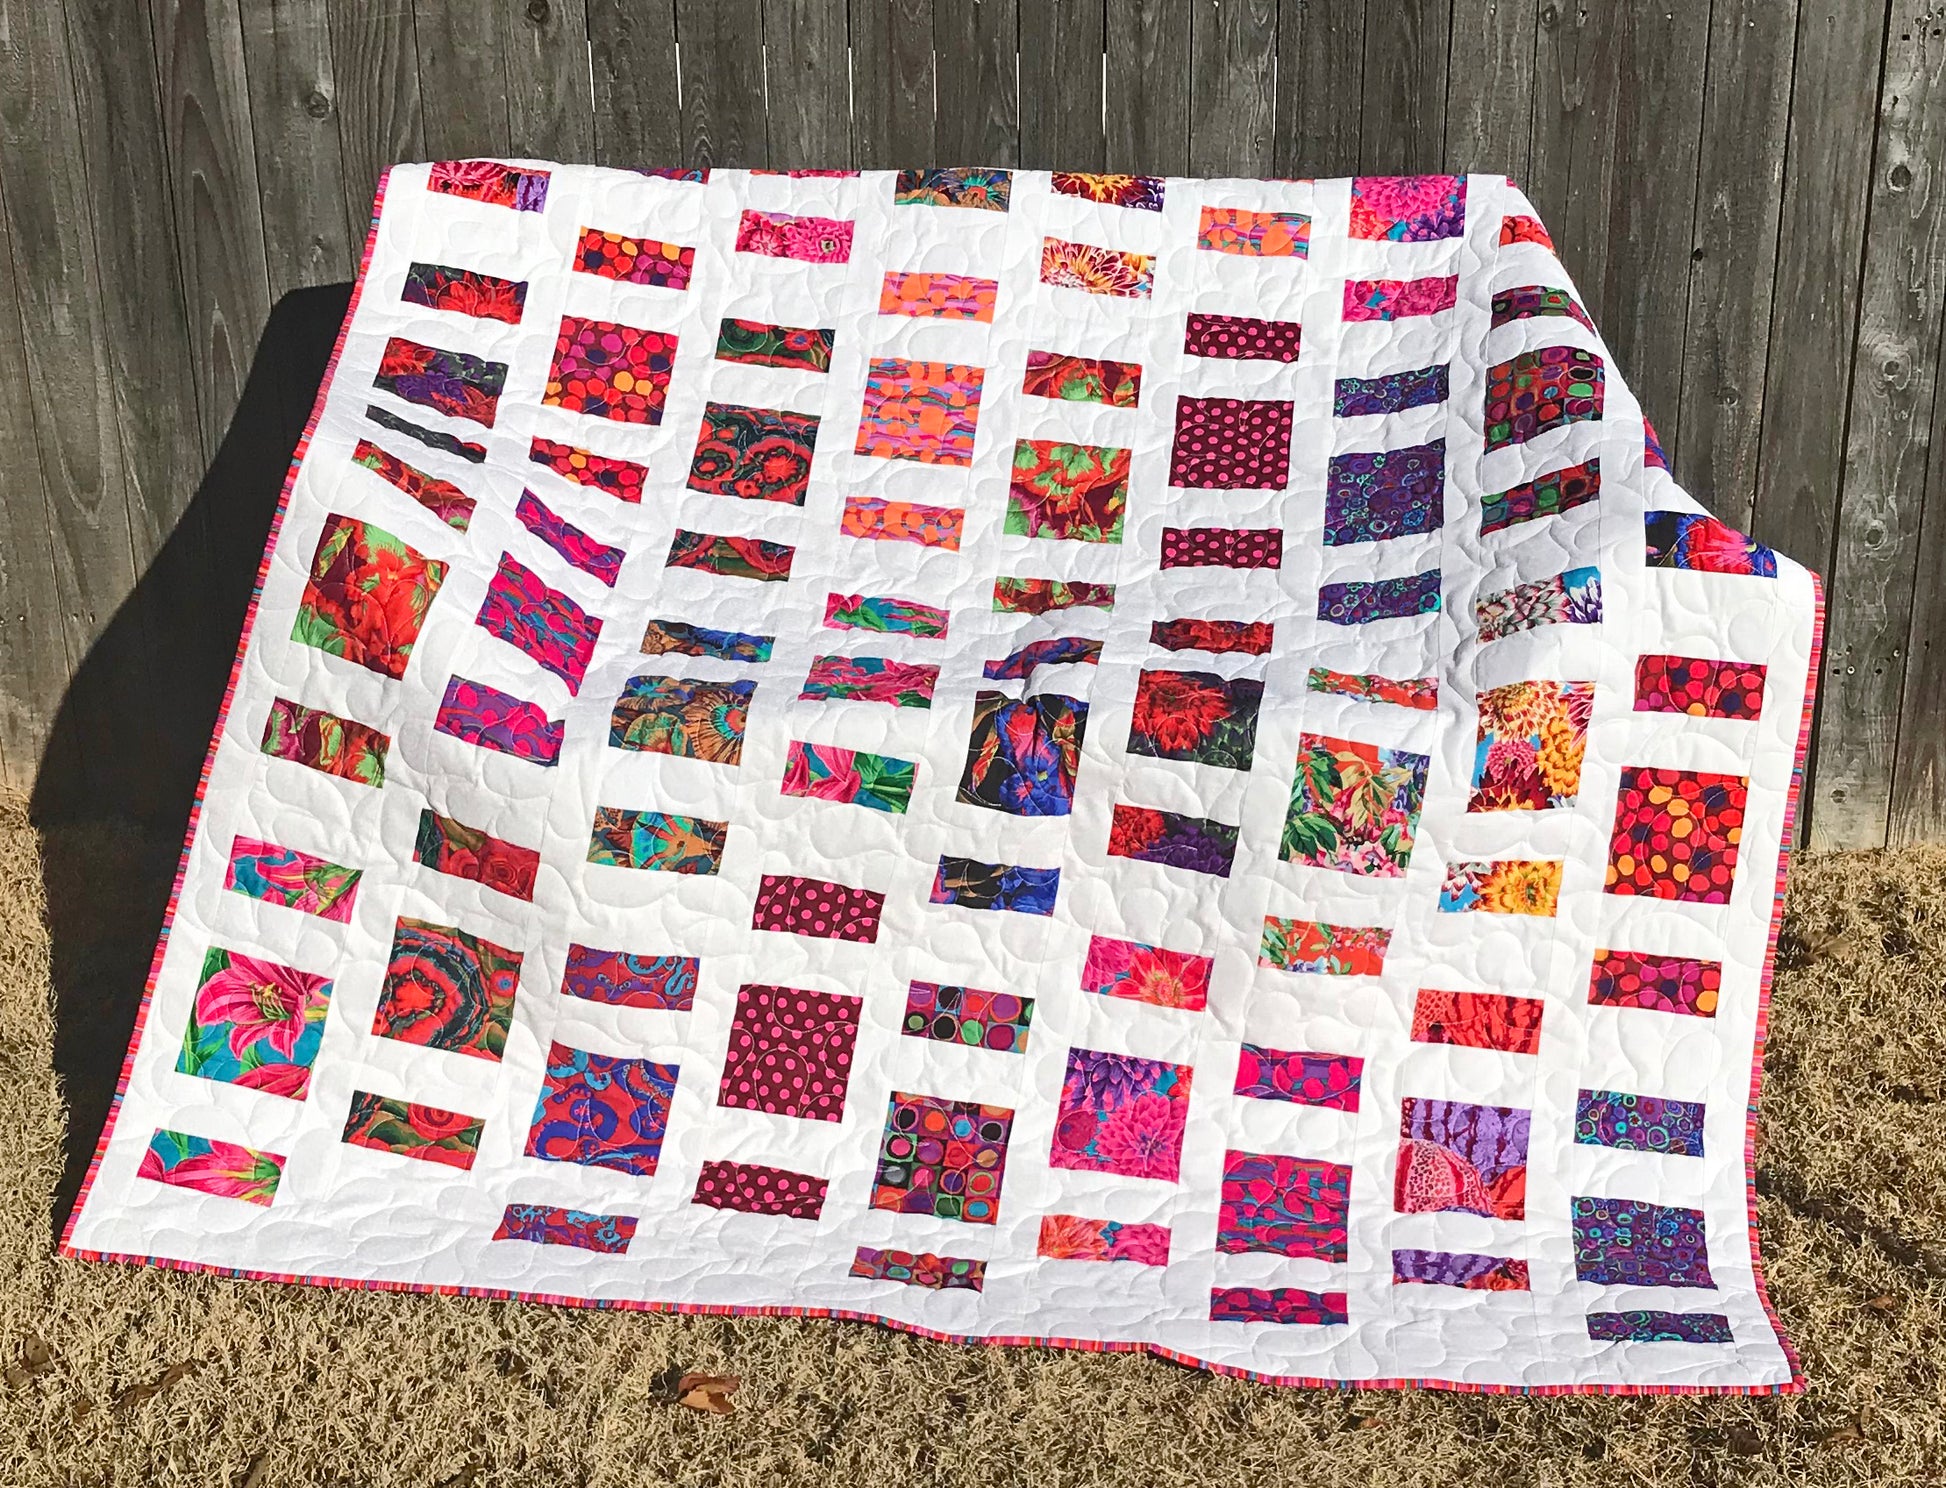 Quilt Pattern for charm squares that has nine columns of squares and rectangles with sashing between the columns. Quilt is displayed on a bench with colorful Kaffe Fassett fabrics.